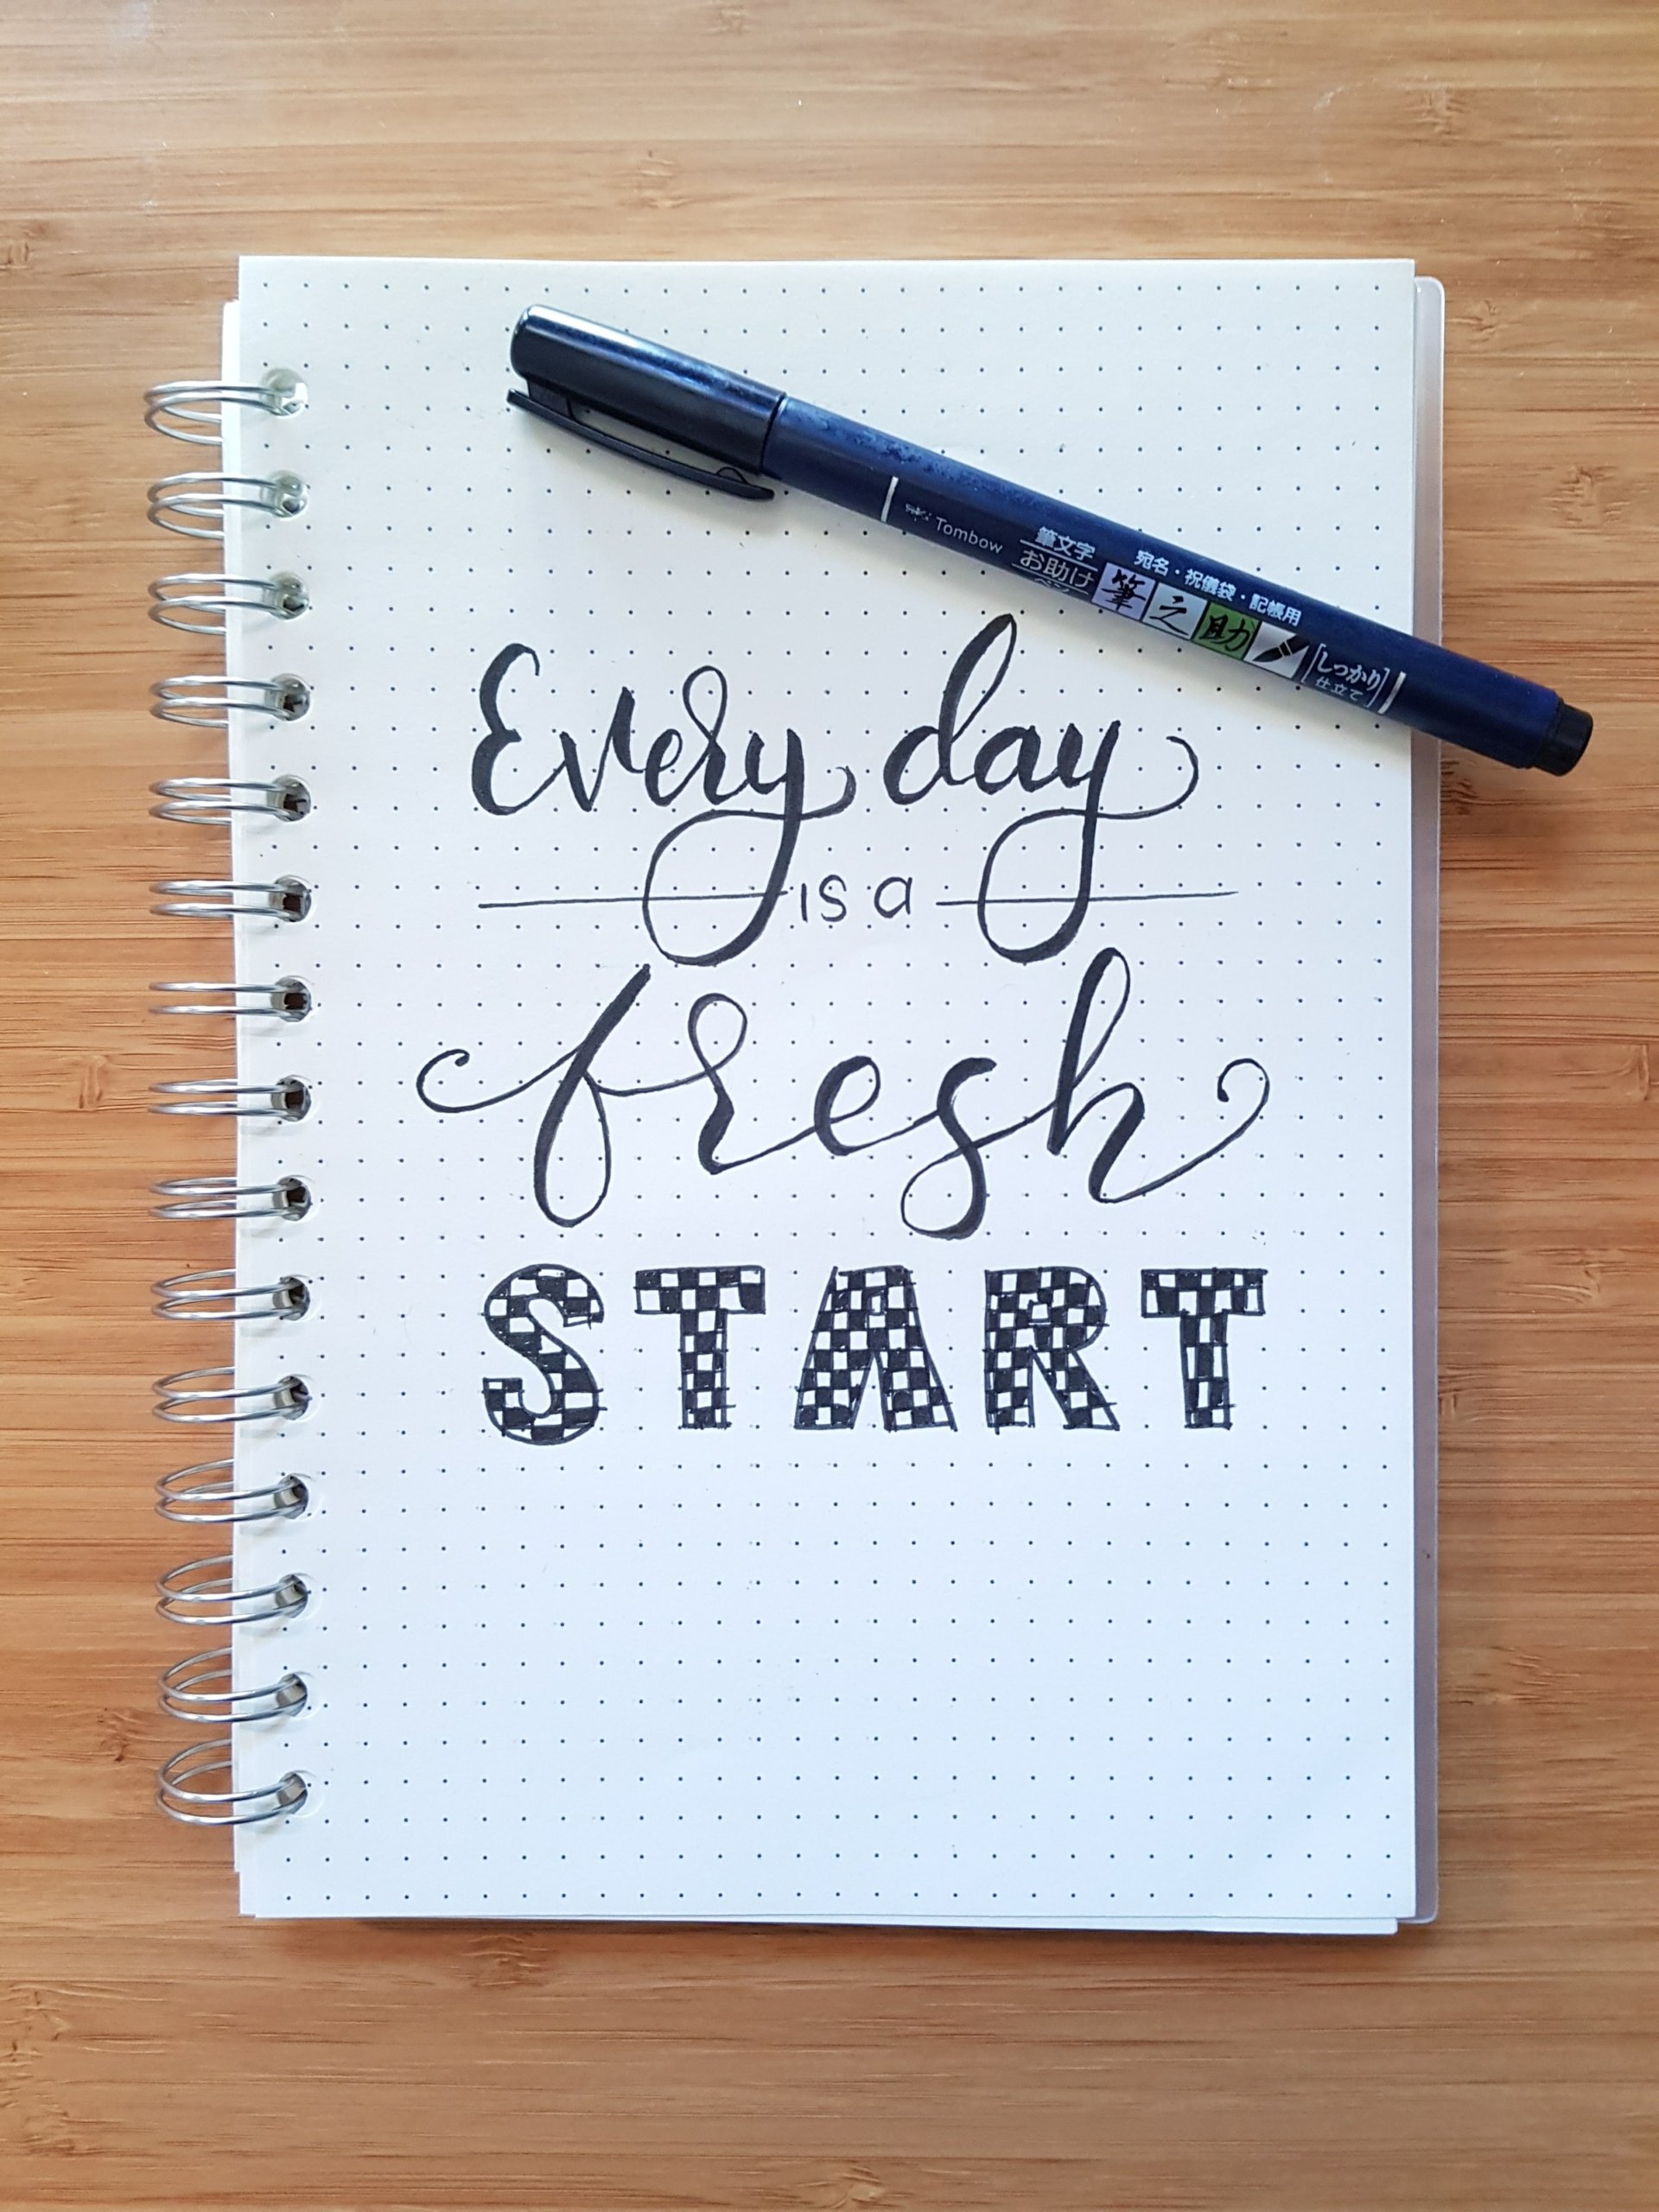 How mental - a spiral calligraphy notebook and a pen that reads Every day is a fresh start